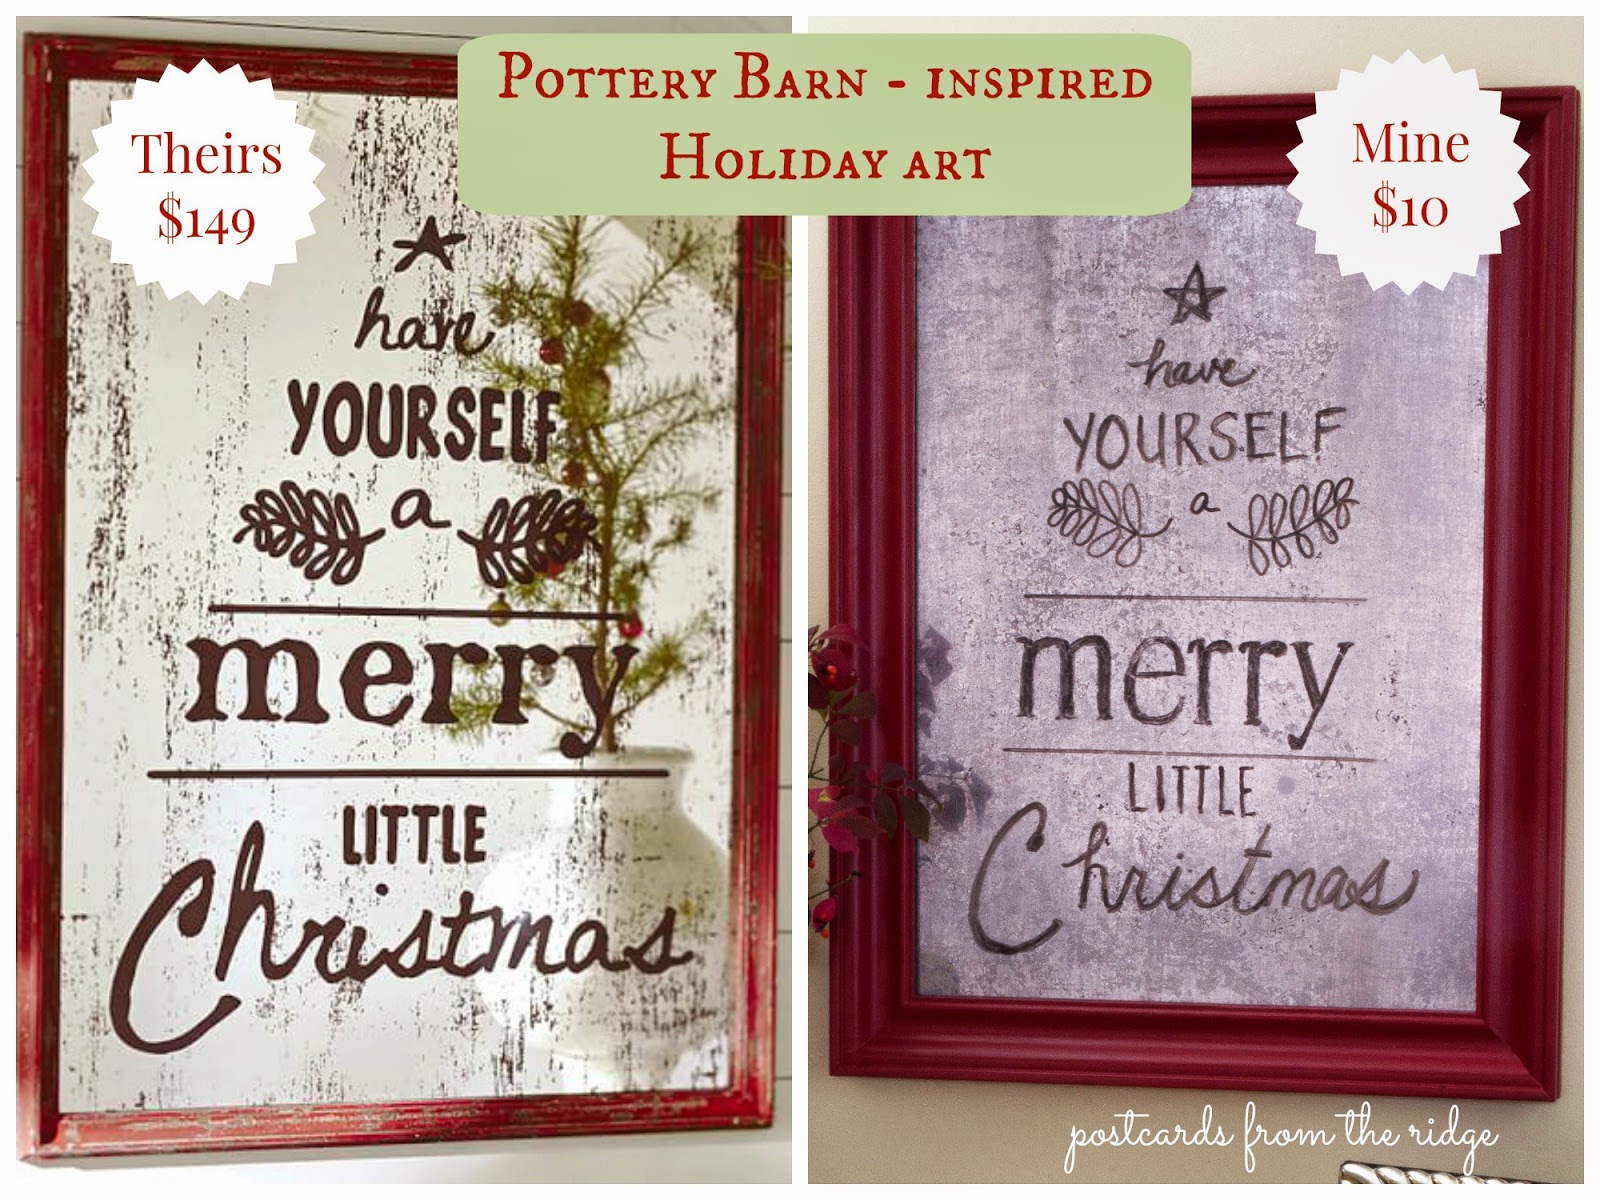 Pottery Barn inspired holiday mercury glass wall art for $10! Their version is $149. Gotta try this!